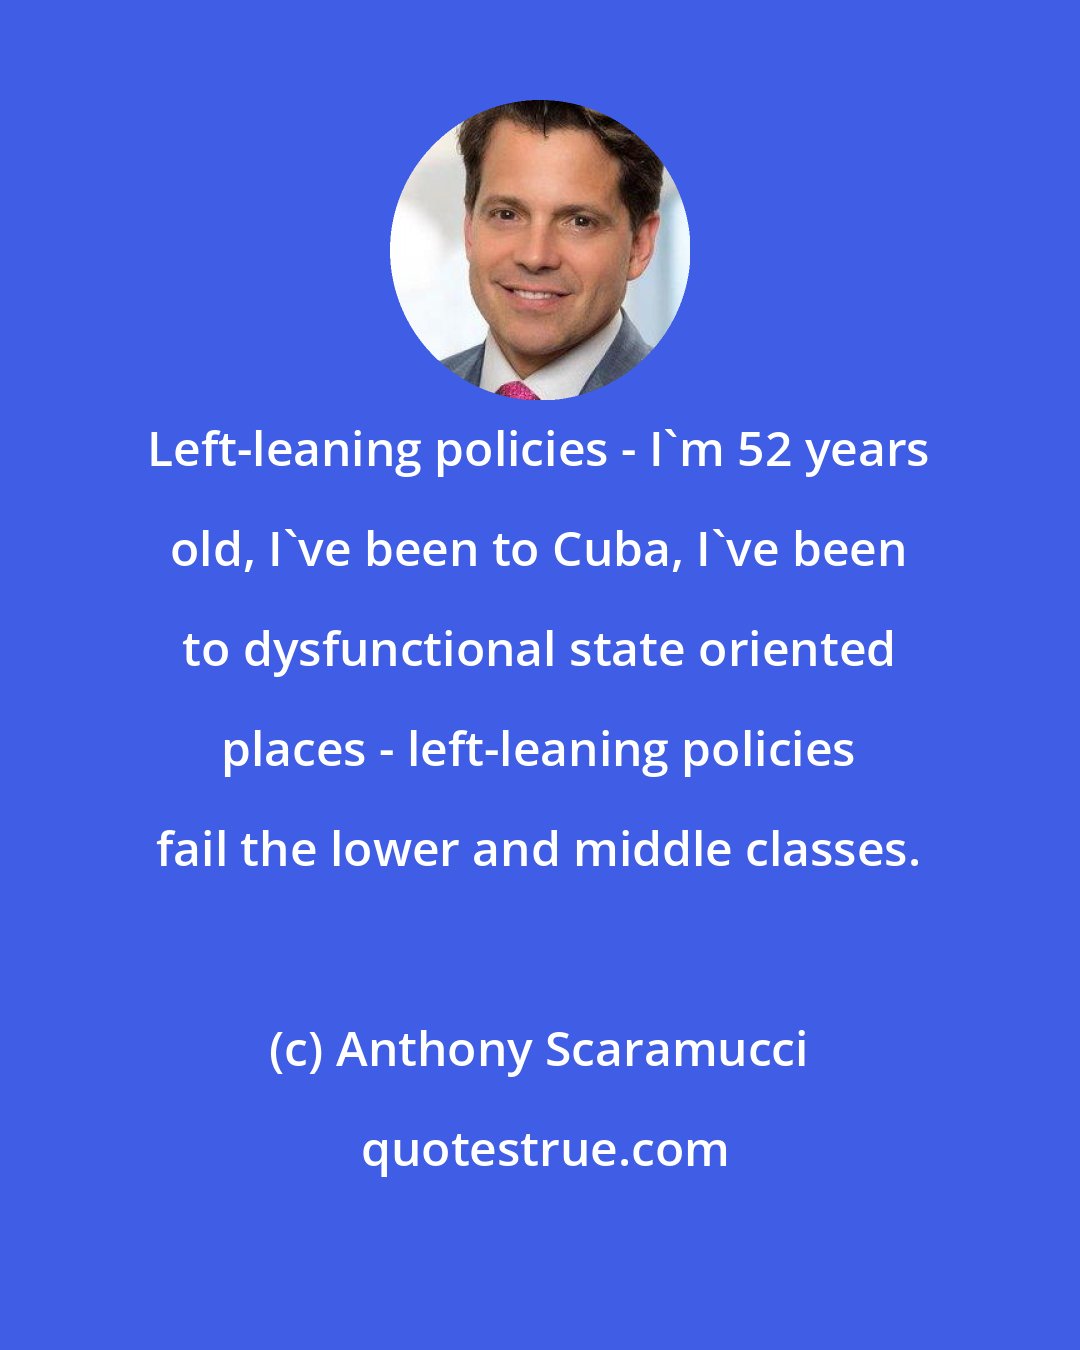 Anthony Scaramucci: Left-leaning policies - I'm 52 years old, I've been to Cuba, I've been to dysfunctional state oriented places - left-leaning policies fail the lower and middle classes.